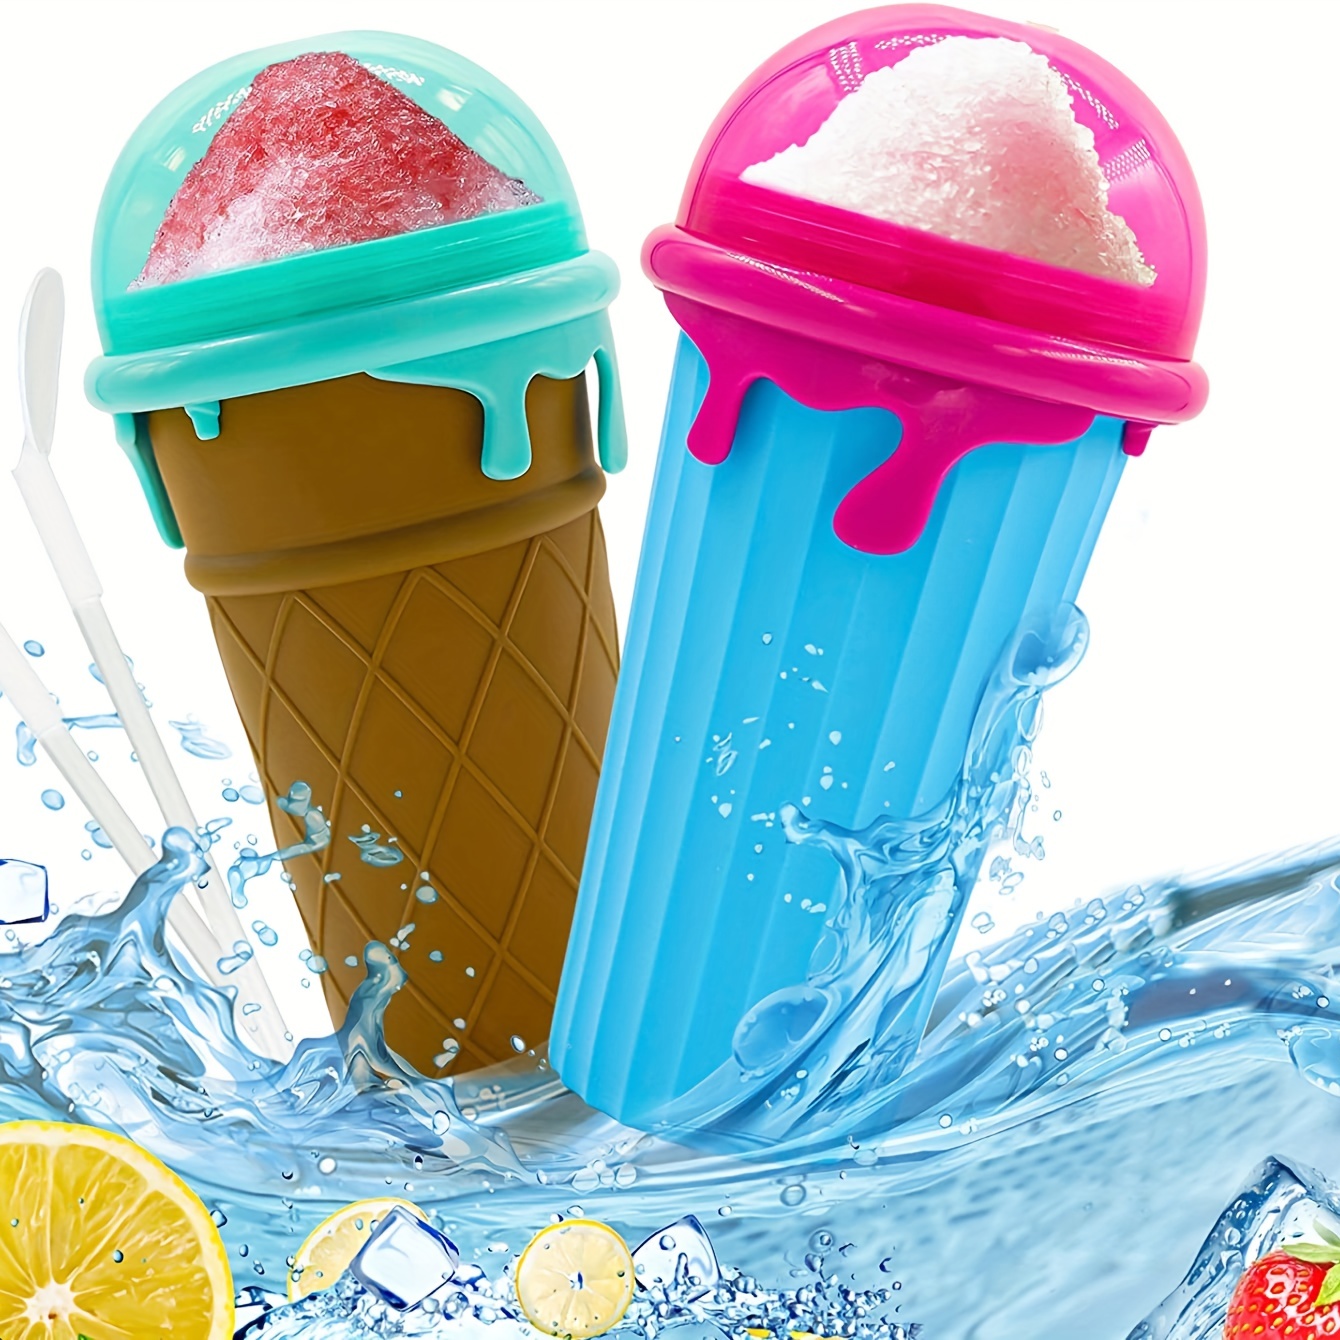 Slushie Maker Cup, Smoothie Silicon Cup, Frozen Magic Squeeze Cup Homemade  Milk Shake Ice Cream Maker Cooling Cup DIY for Kids and Family  (Yellow+Pink) 